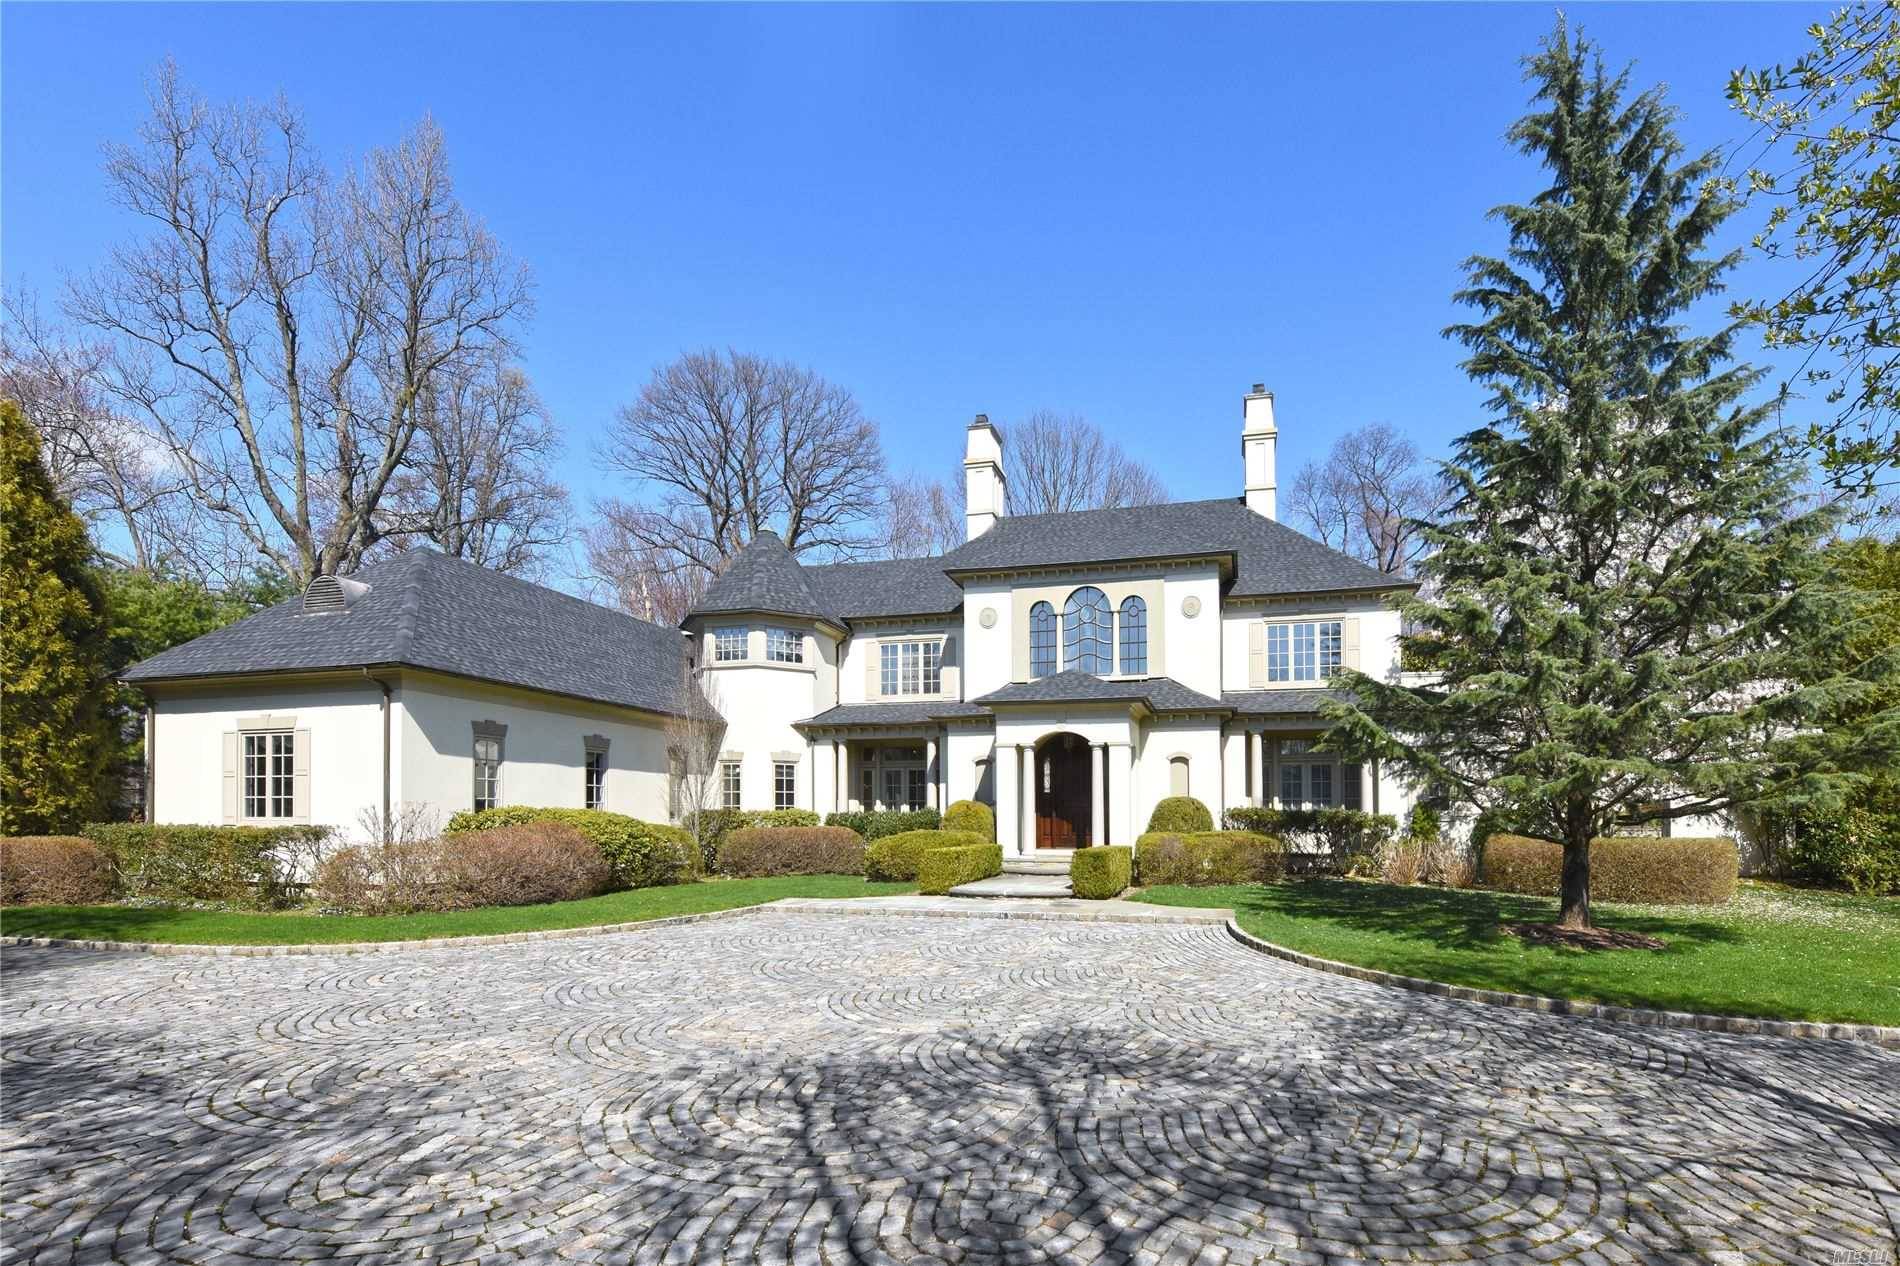 A Crown Jewel In Harriman Estates, Truly Exquisite John Keane Built Custom French Manor Home On 2.